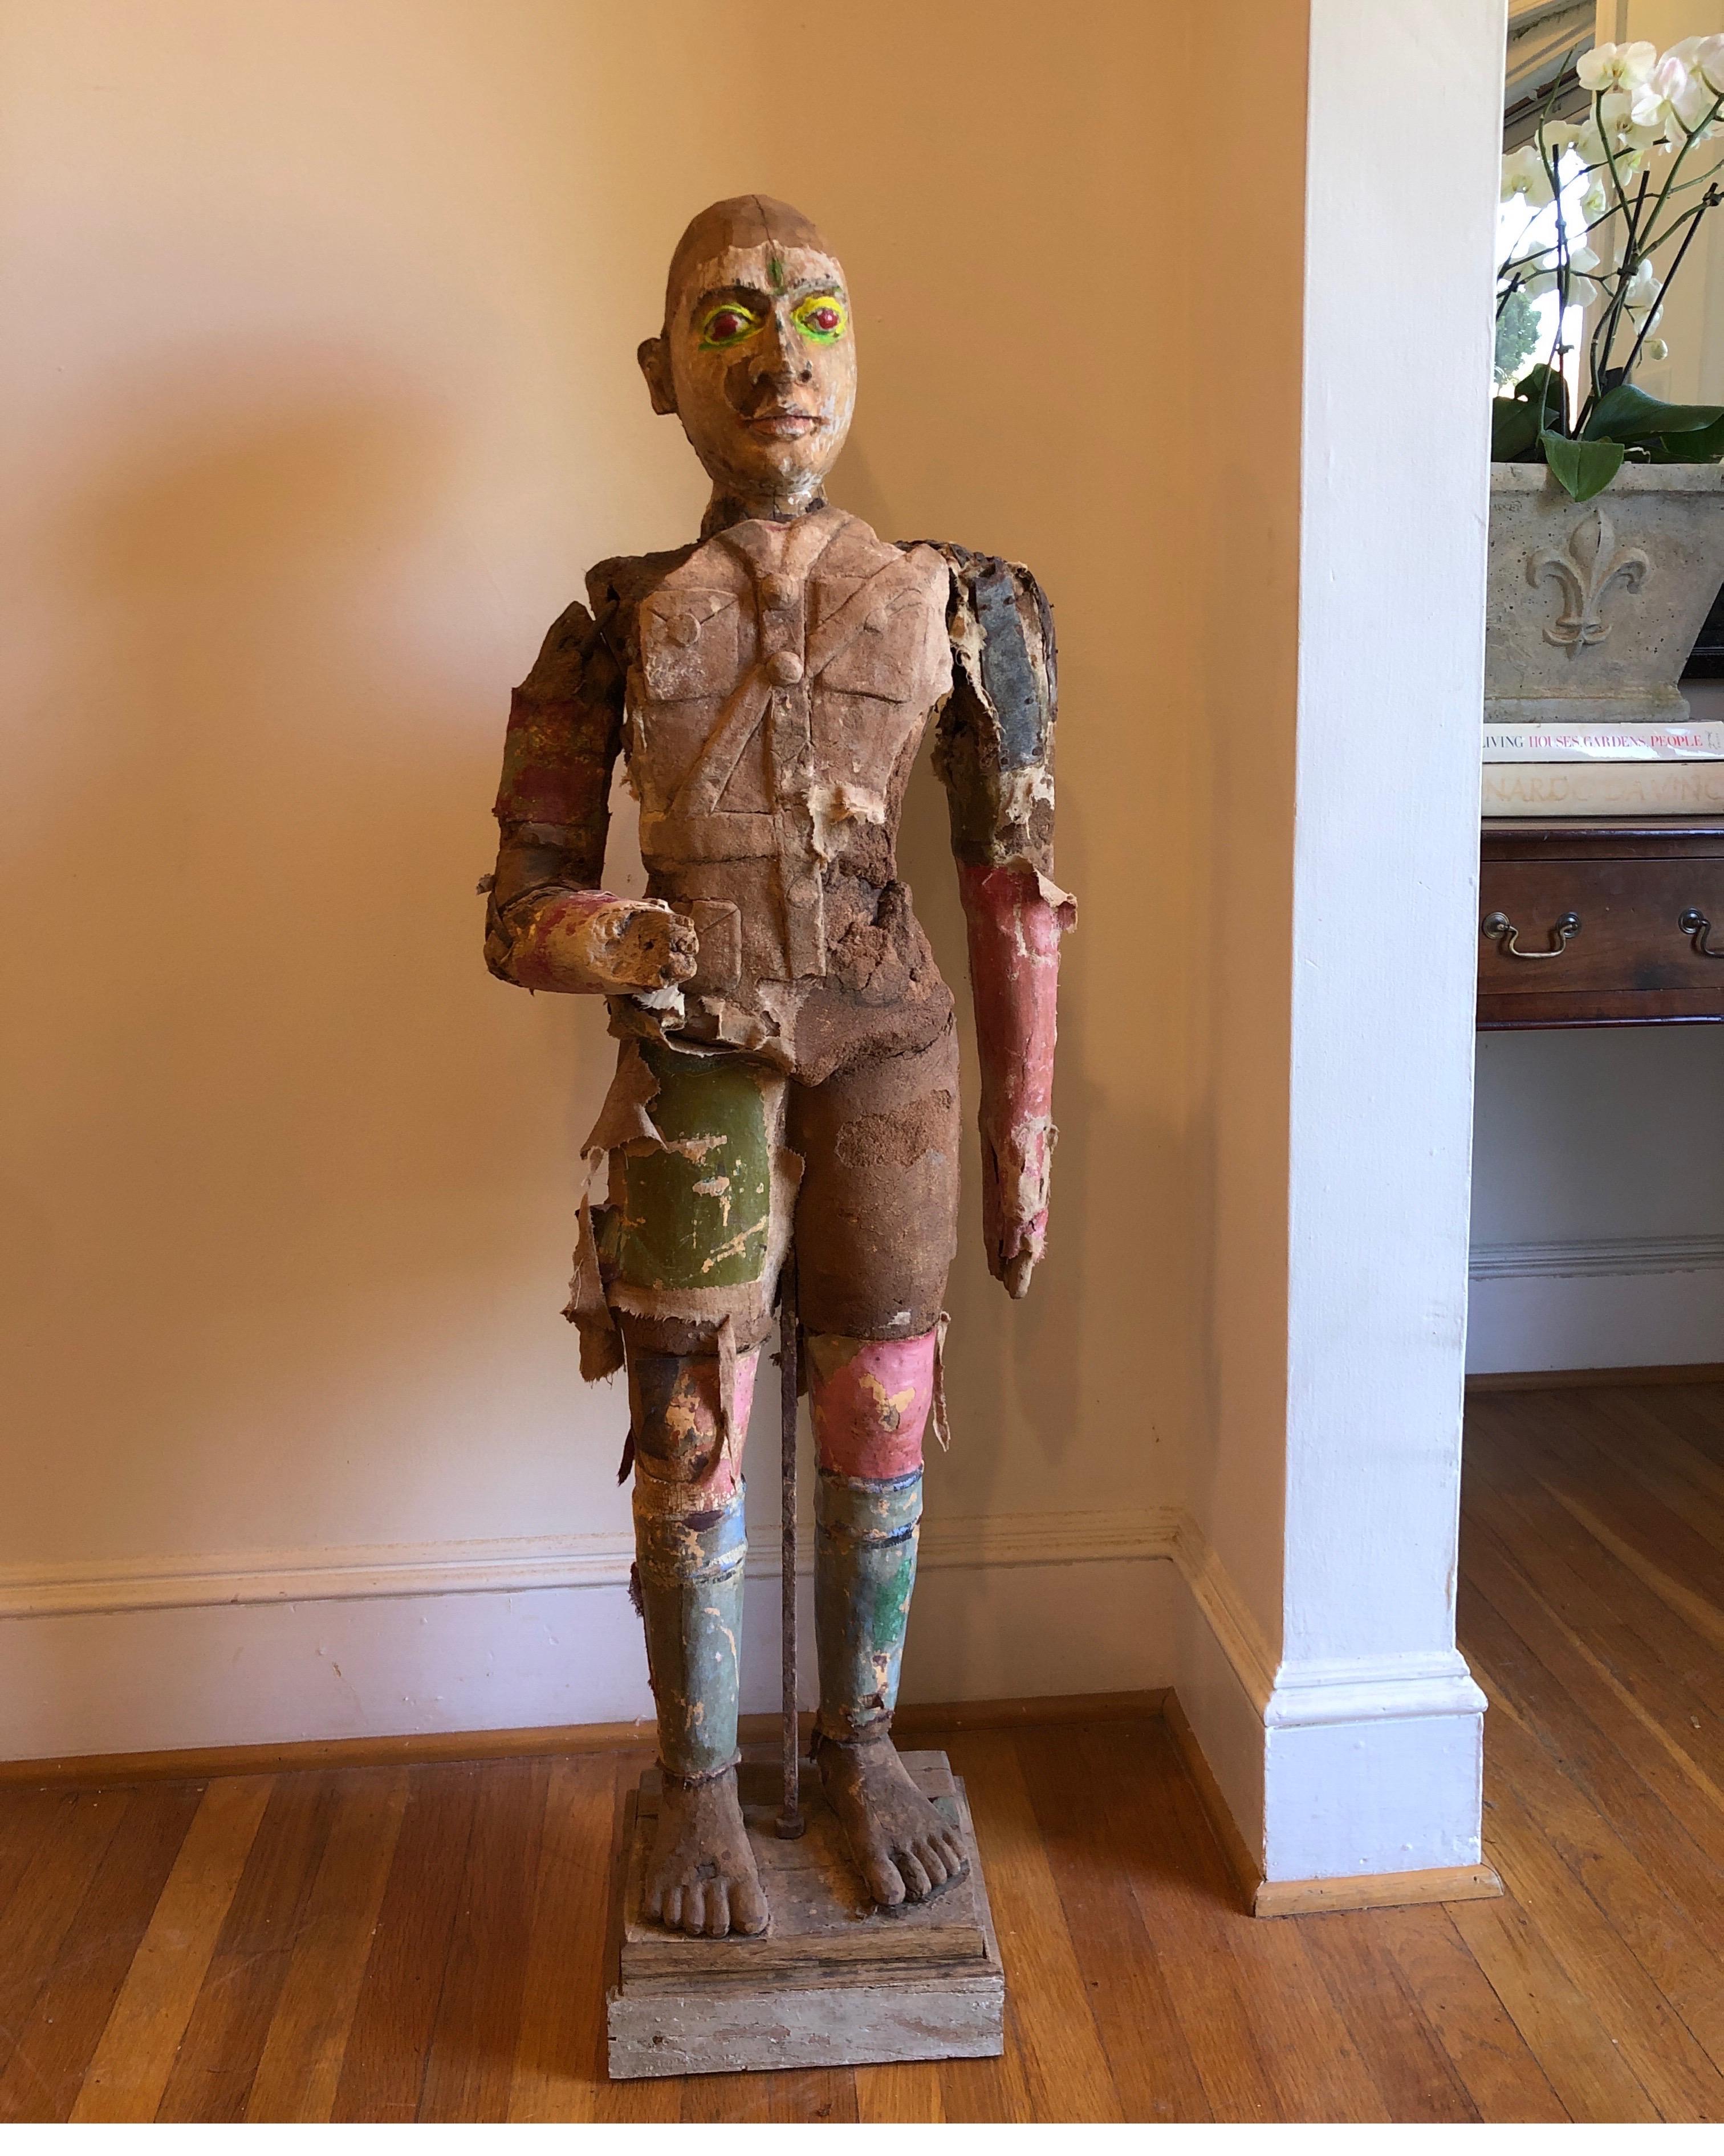 Very unique figure of man with worn details and faded polychrome. 
Signs of heavy deterioration over the years. 

A curiosity/collectors piece.

Please see detailed photos for condition.